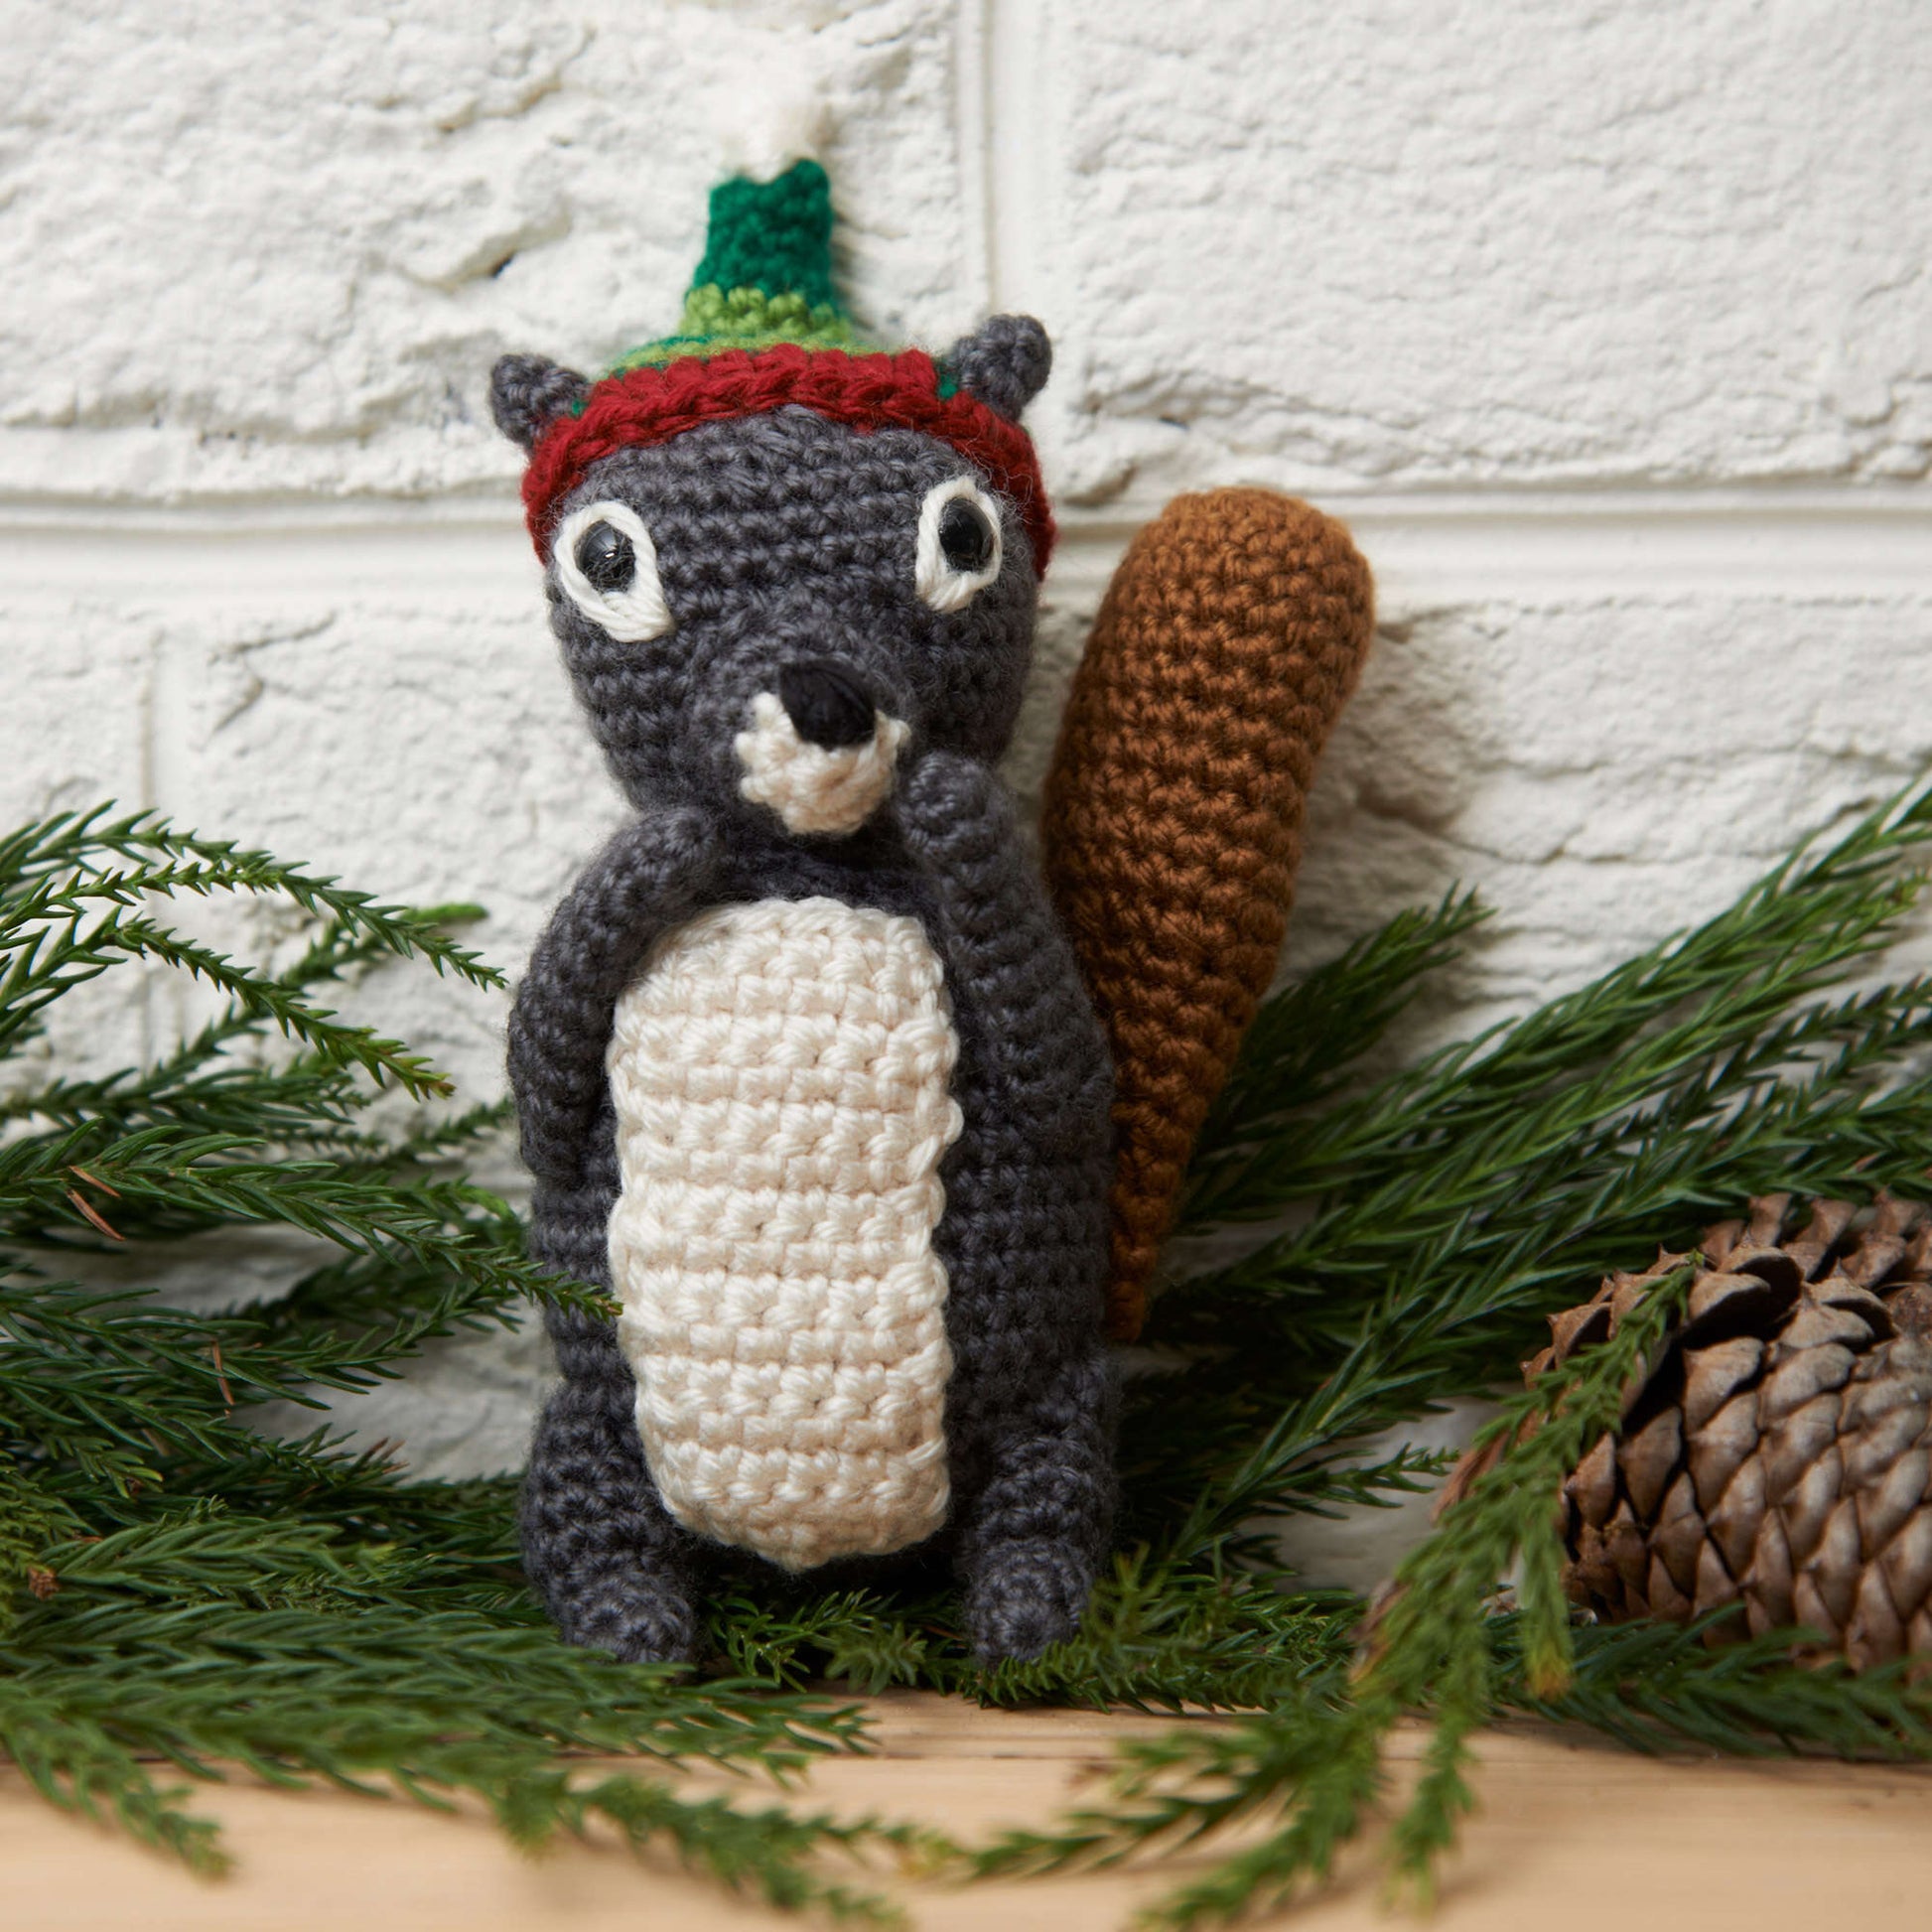 Free Red Heart Squirrel Ornament Crochet Pattern